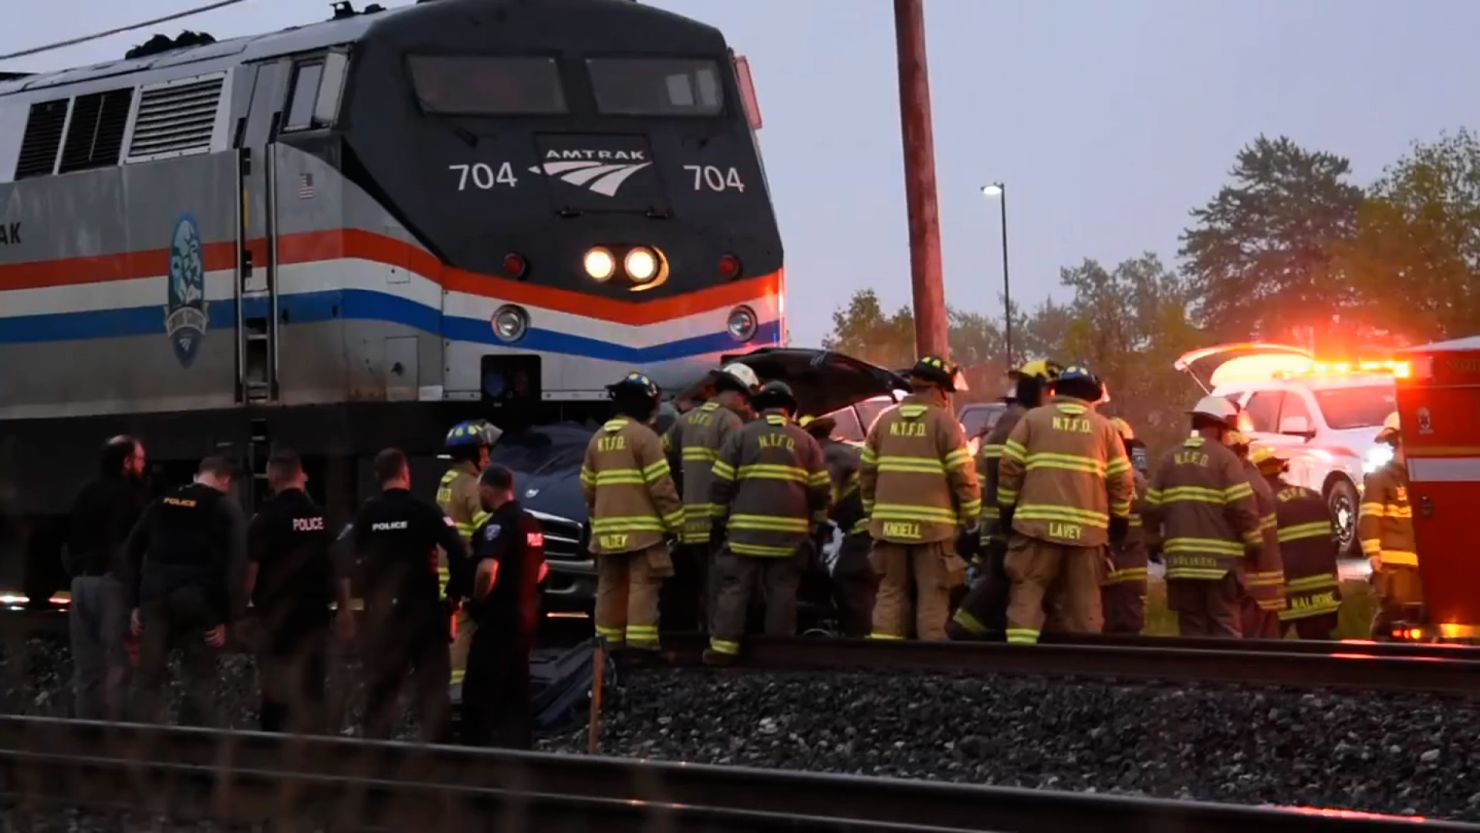 Three people died in a vehicle after an Amtrak train struck it in western New York state.